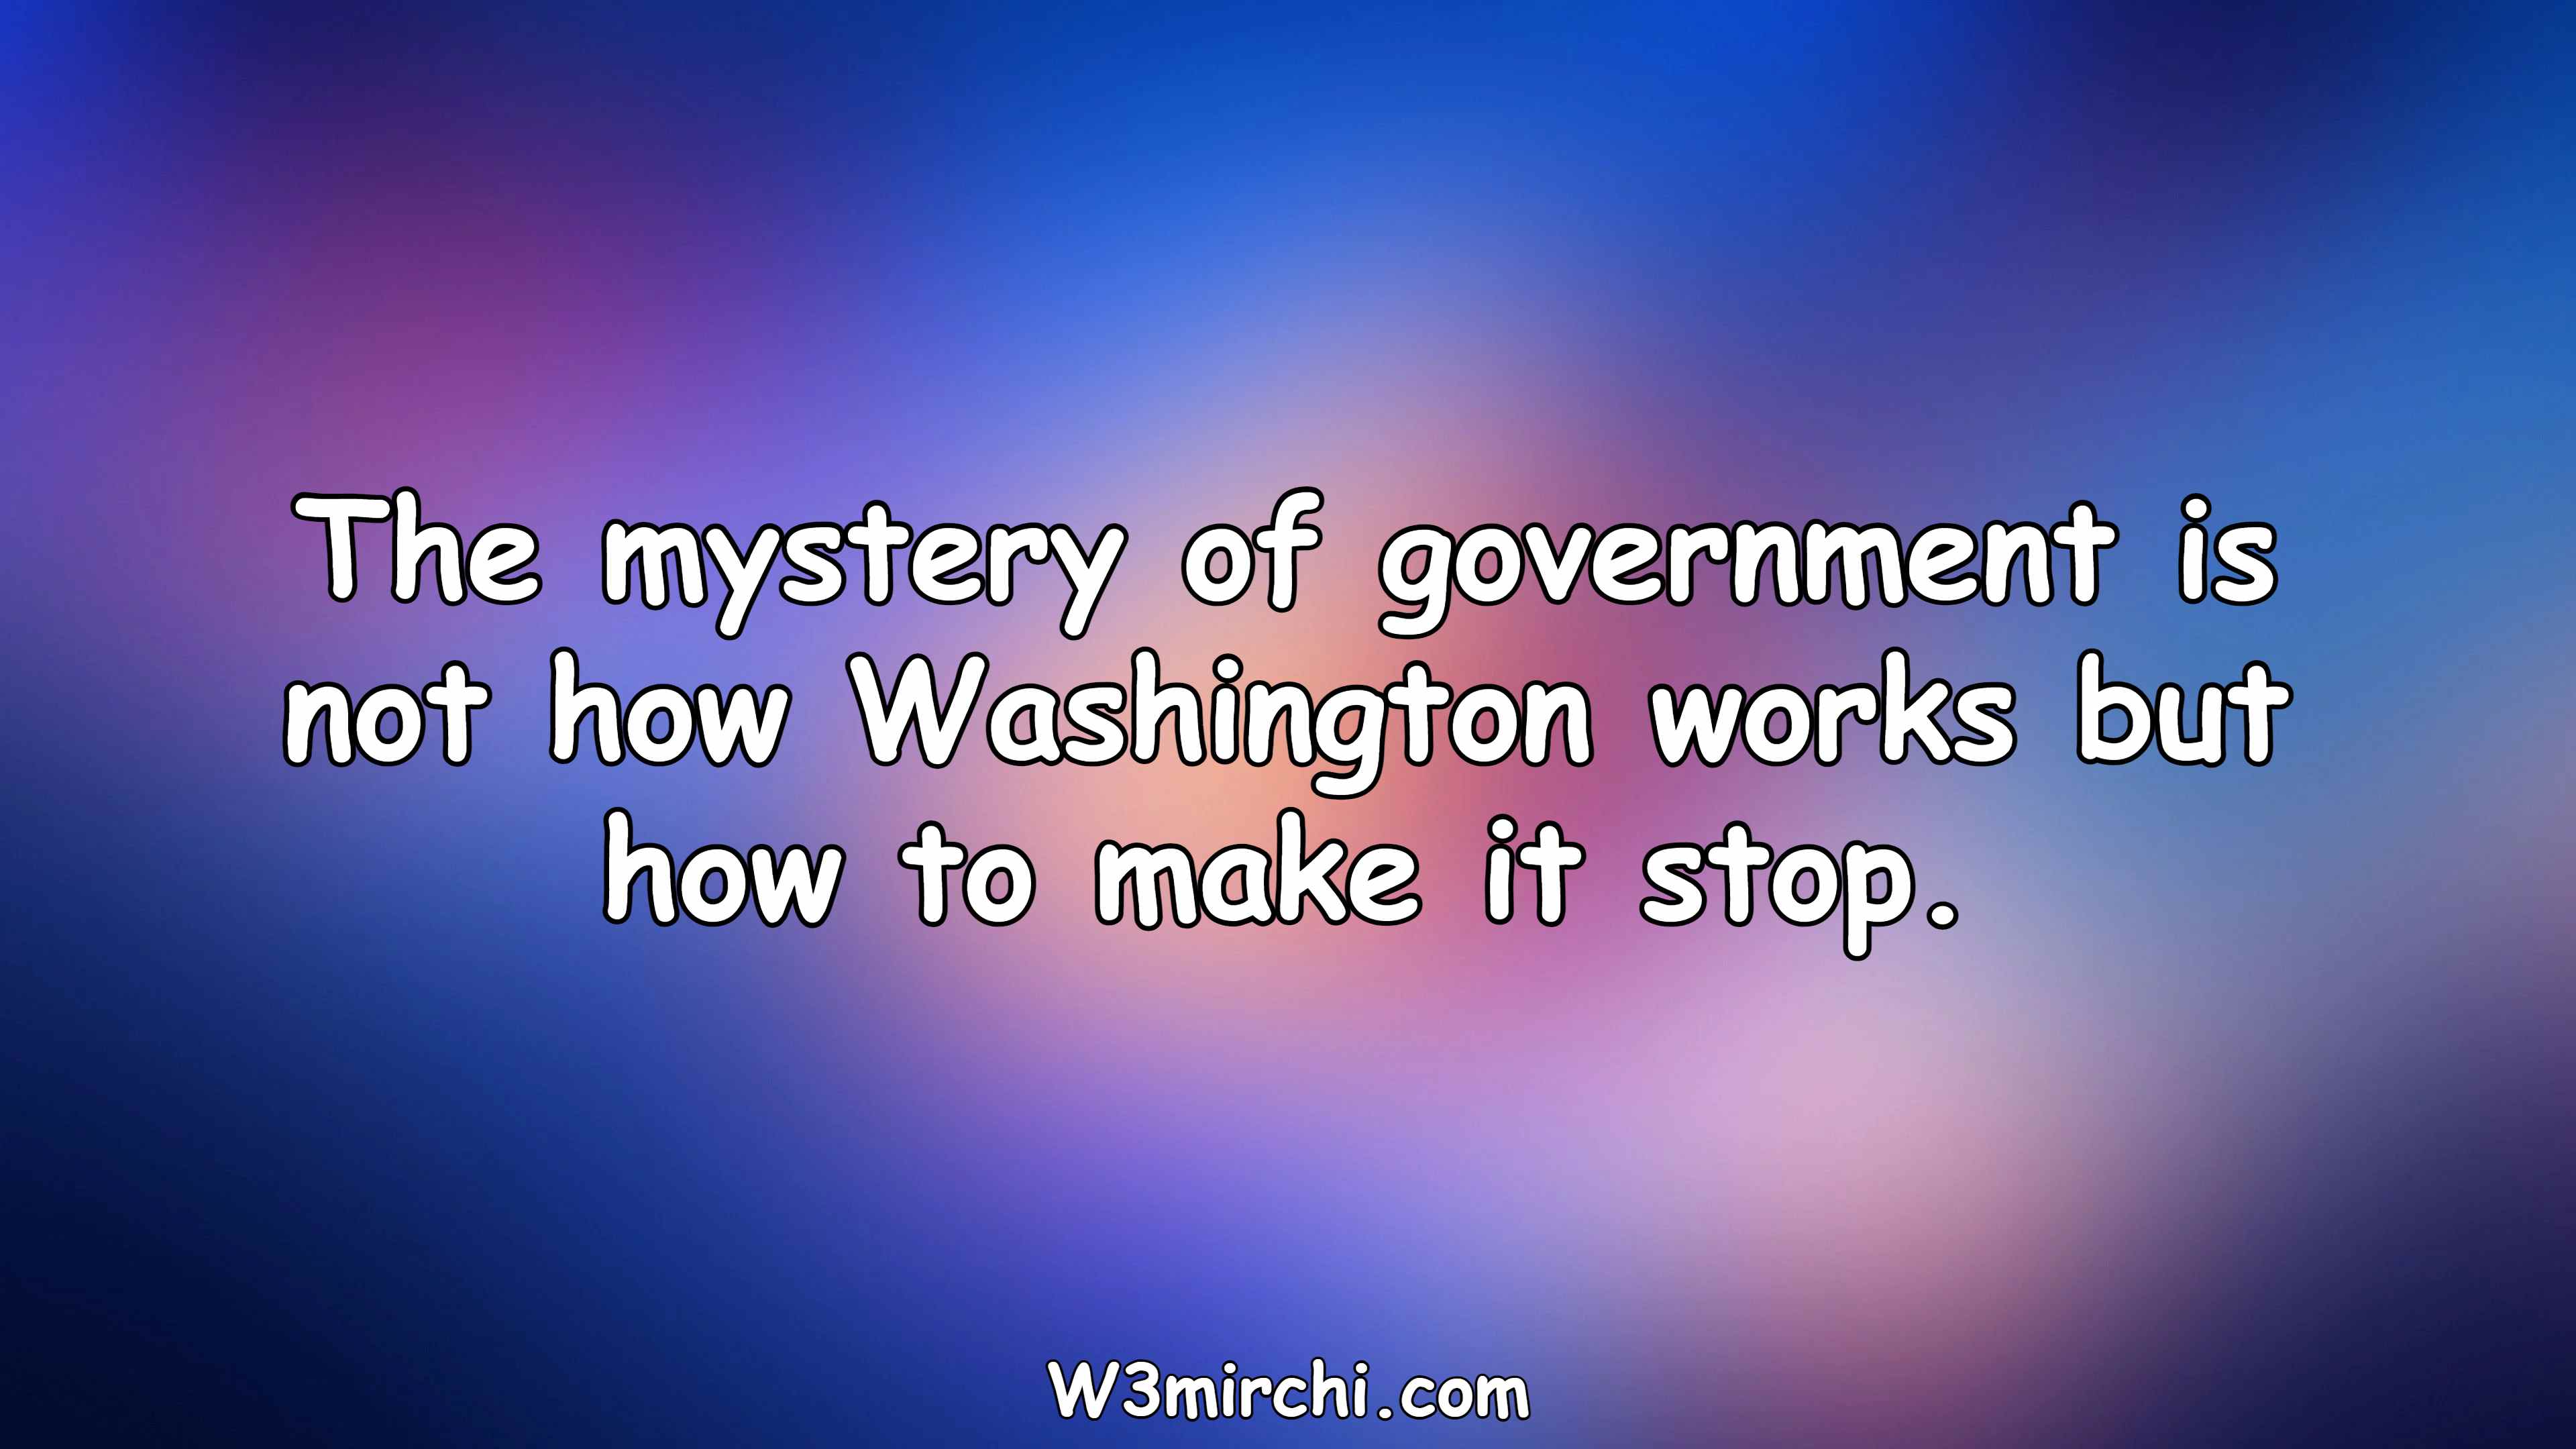 The mystery of government is not how